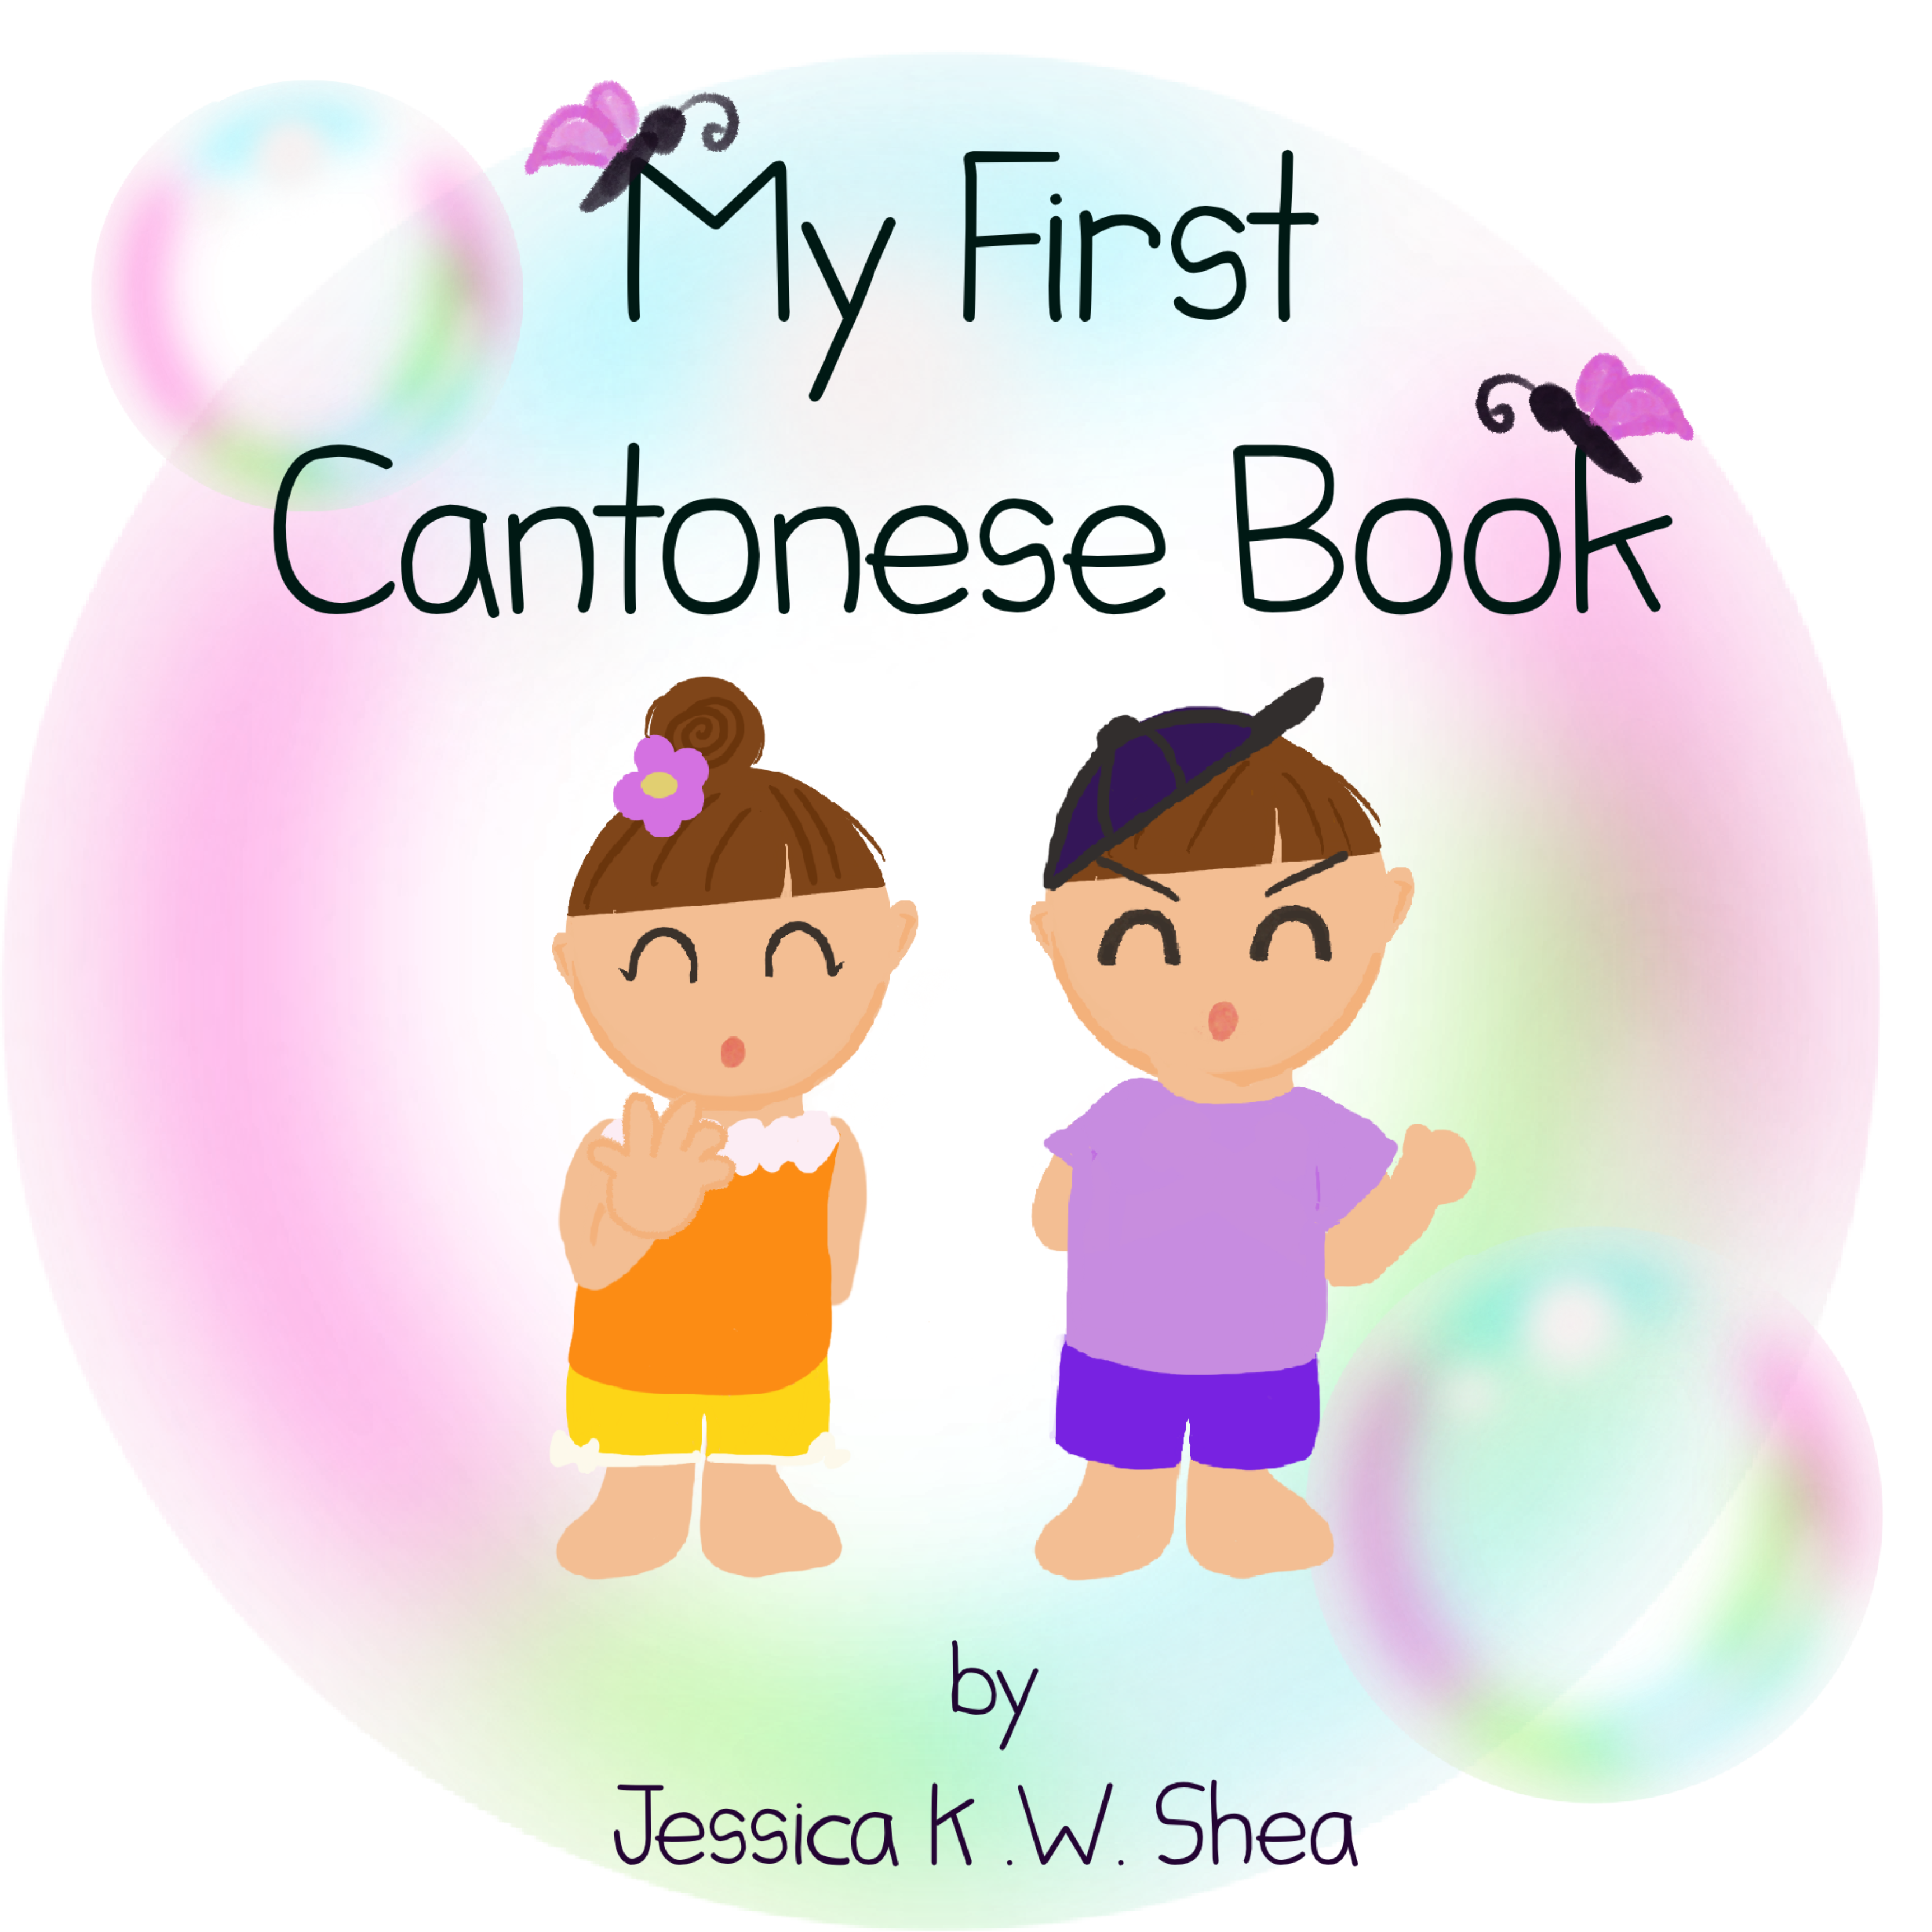 First Cantonese Book